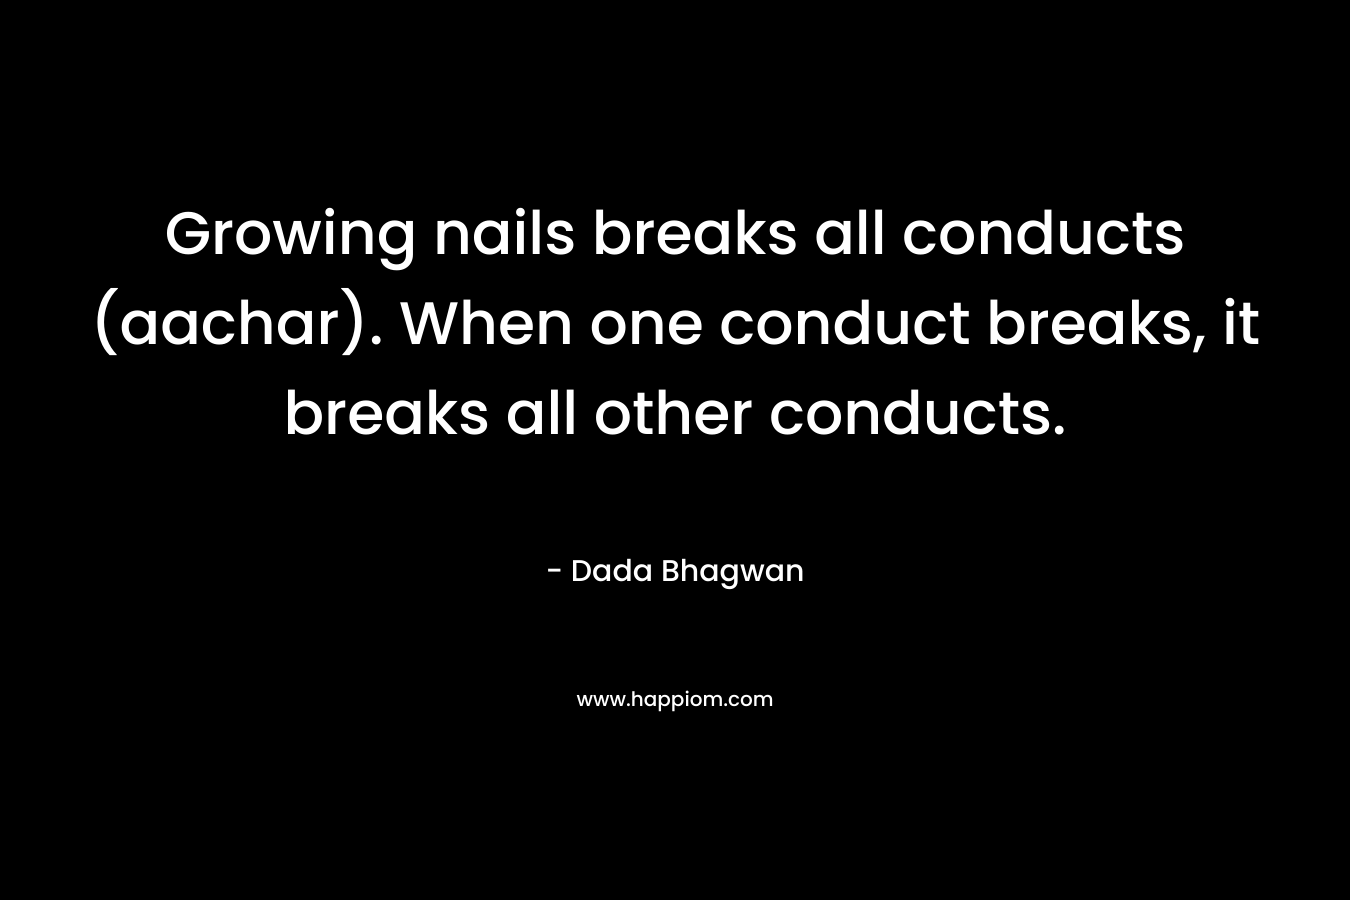 Growing nails breaks all conducts (aachar). When one conduct breaks, it breaks all other conducts.